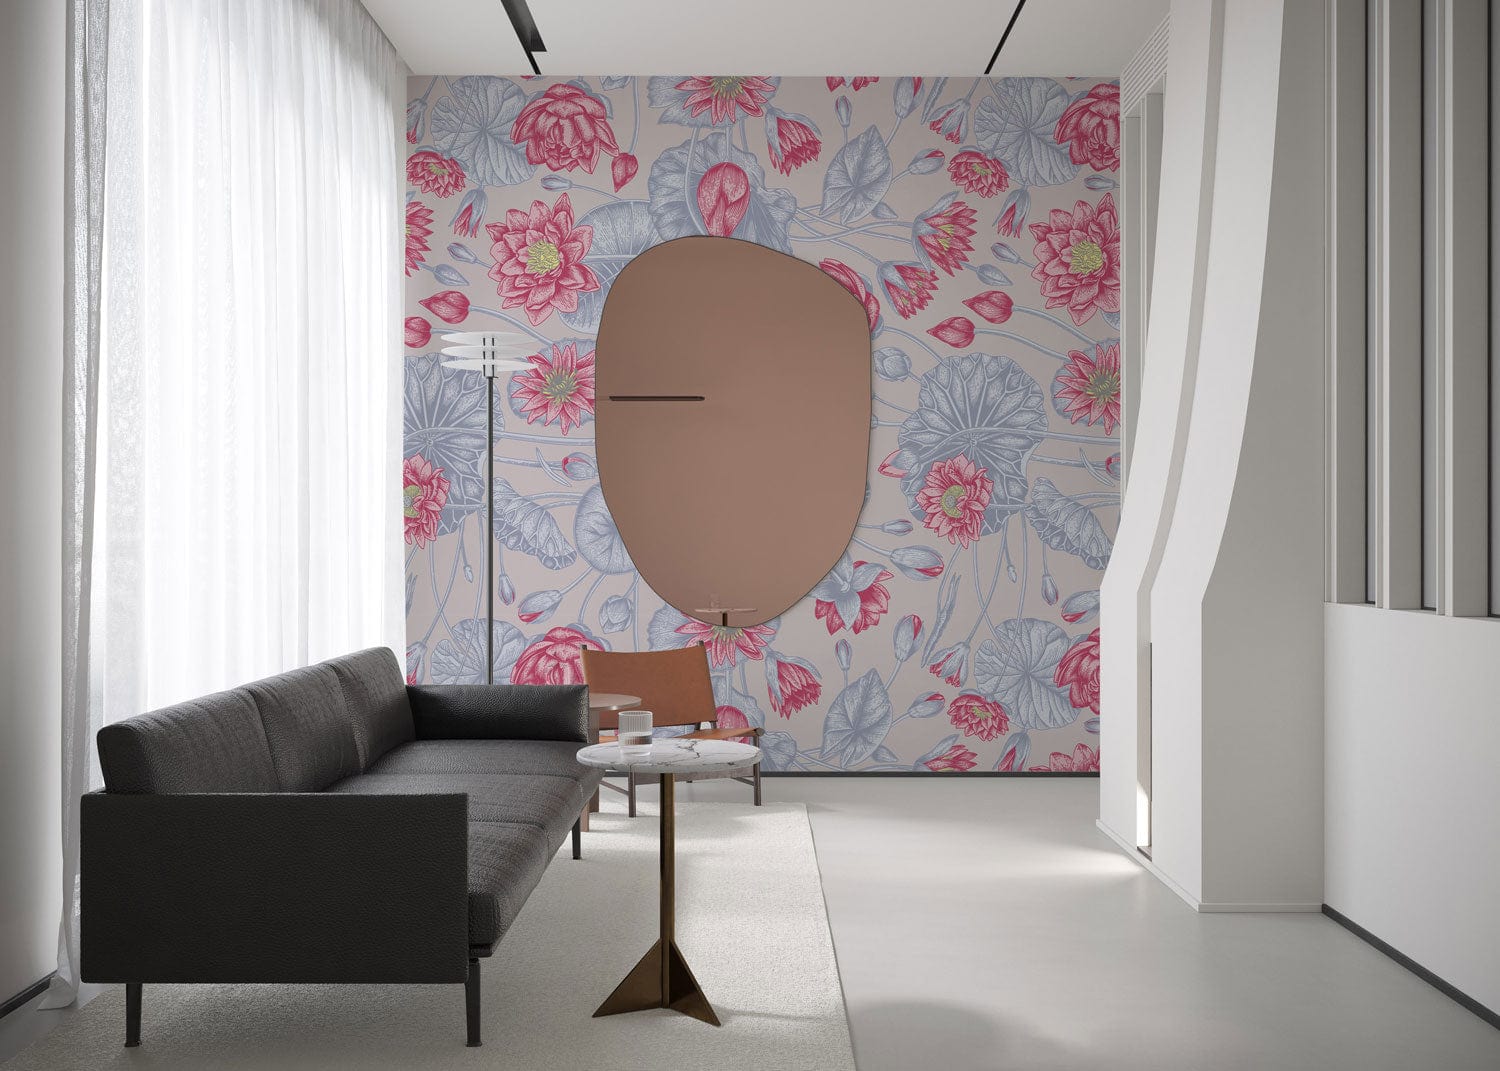 Wallpaper mural featuring a bright pink lotus flower for the living room's decor.